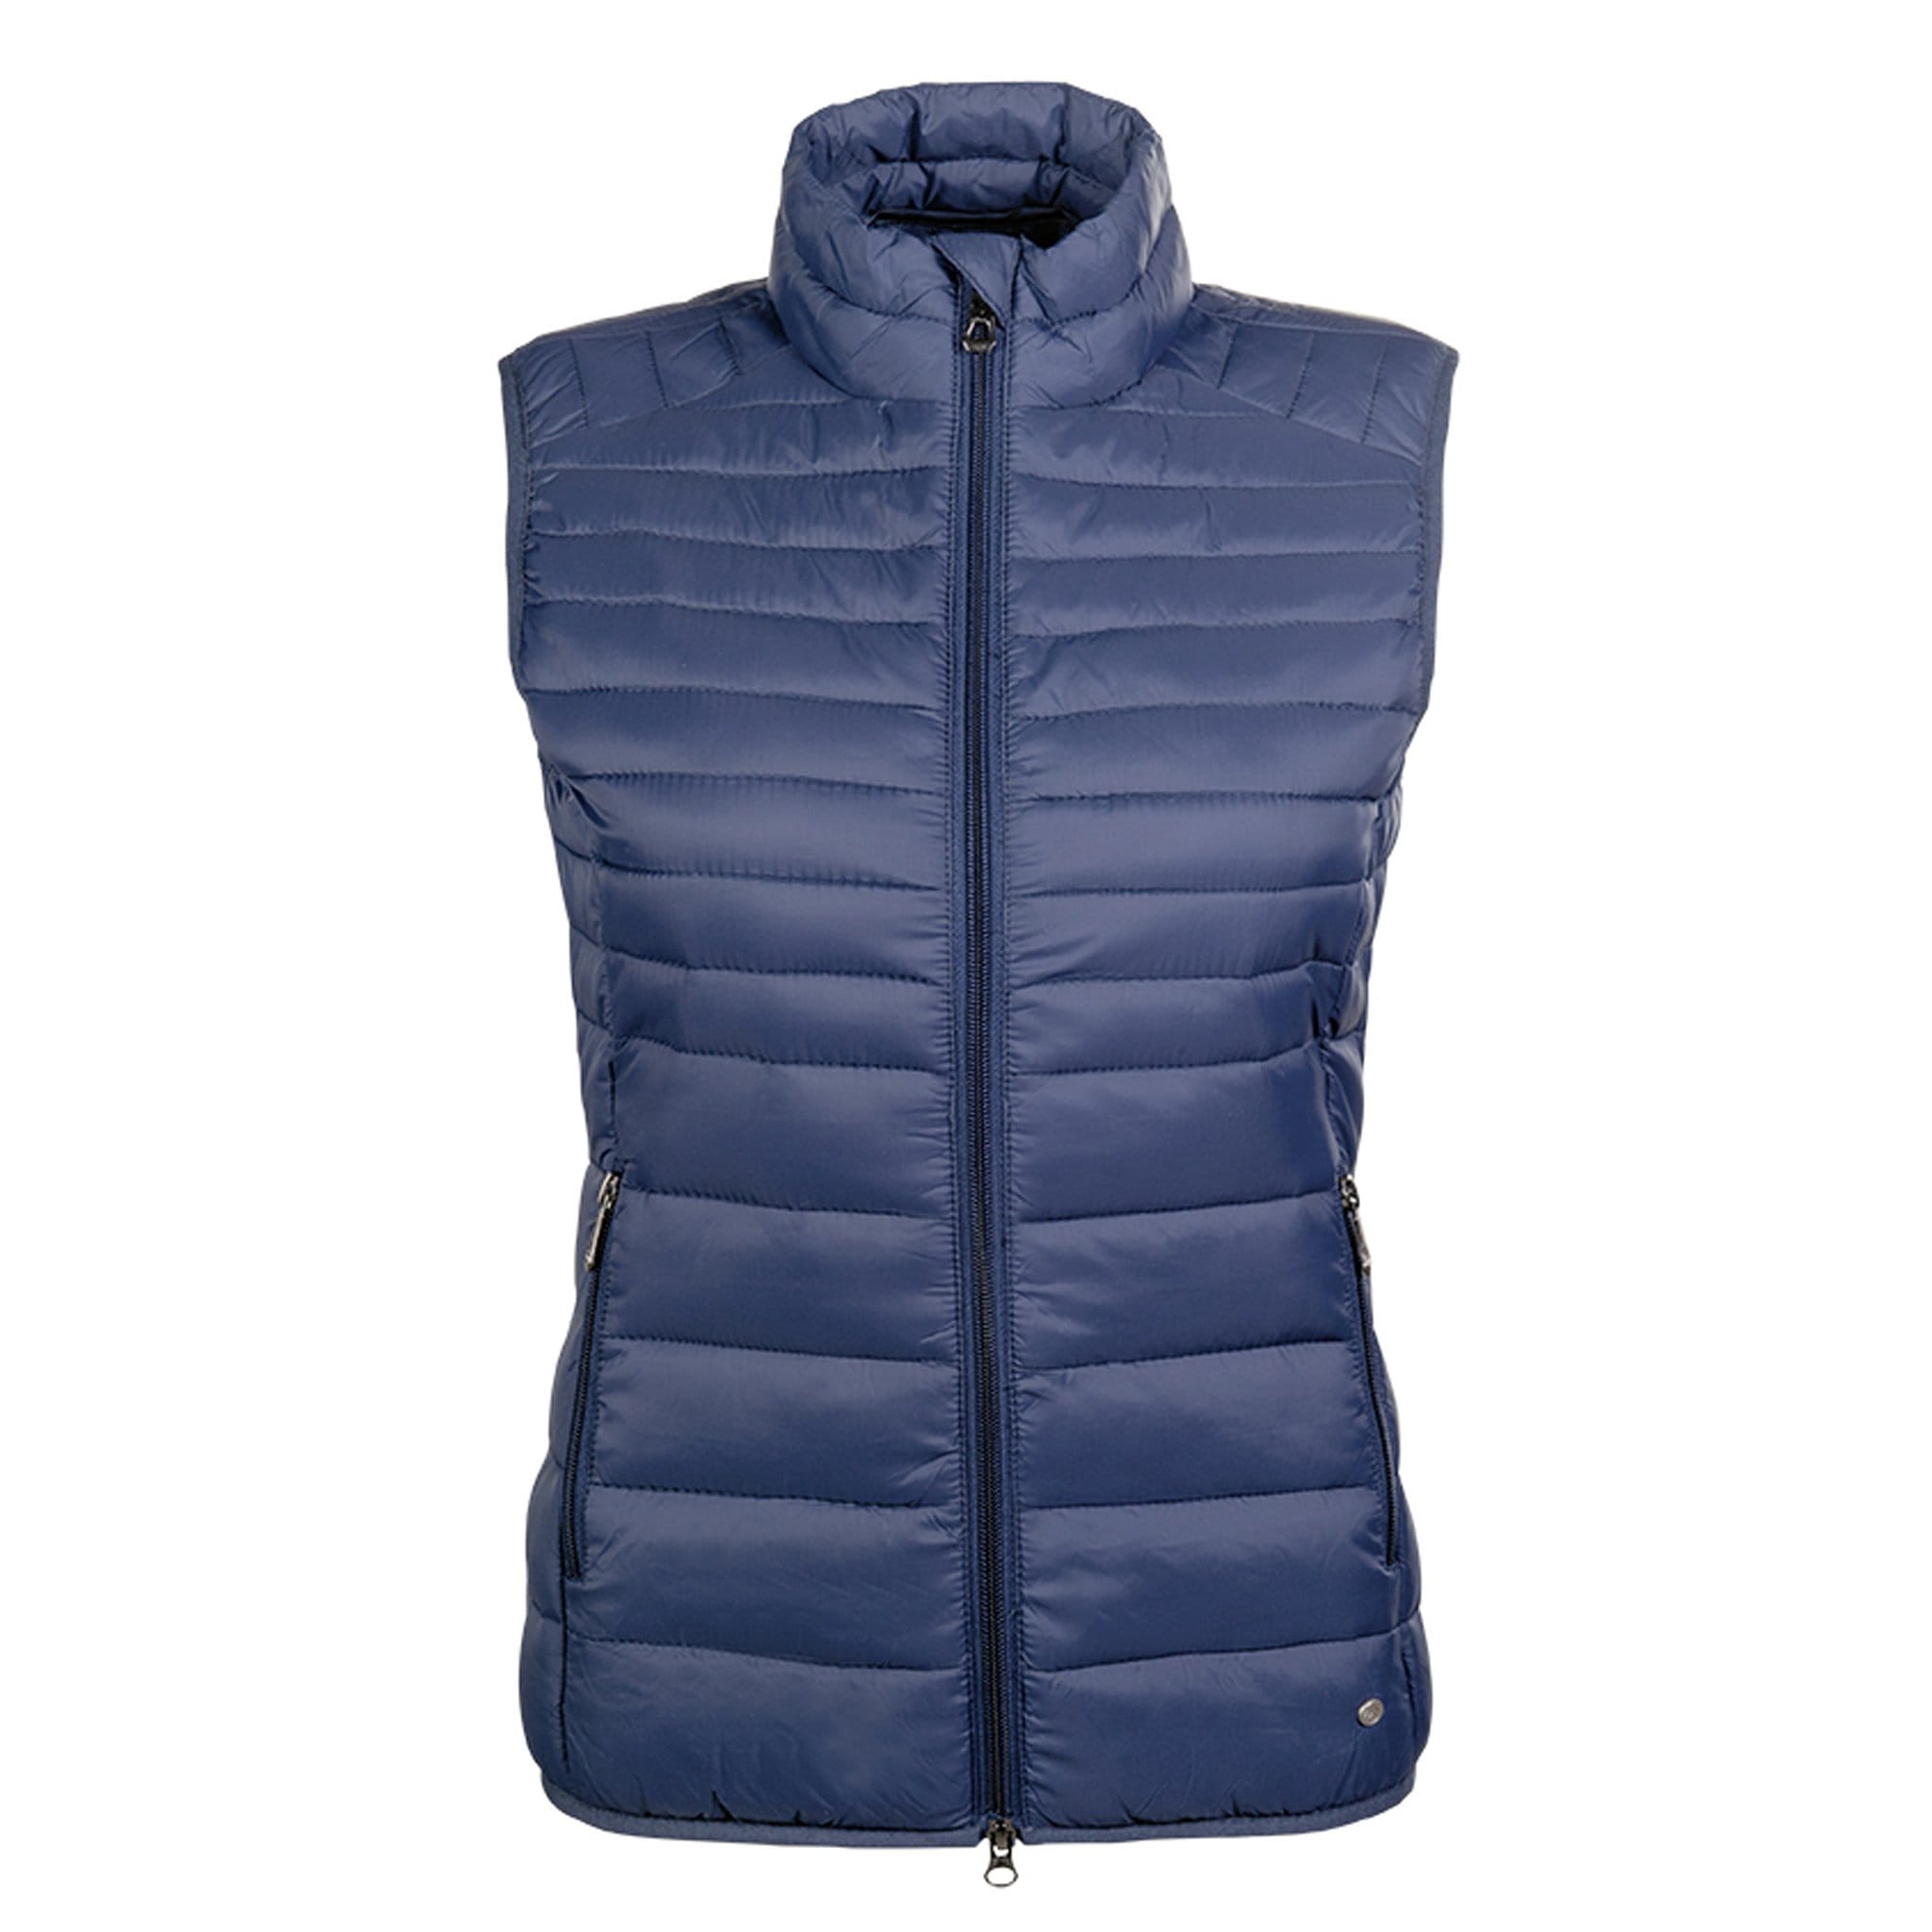 HKM Lena Quilted Gilet 12550 Navy Dark Blue Front View